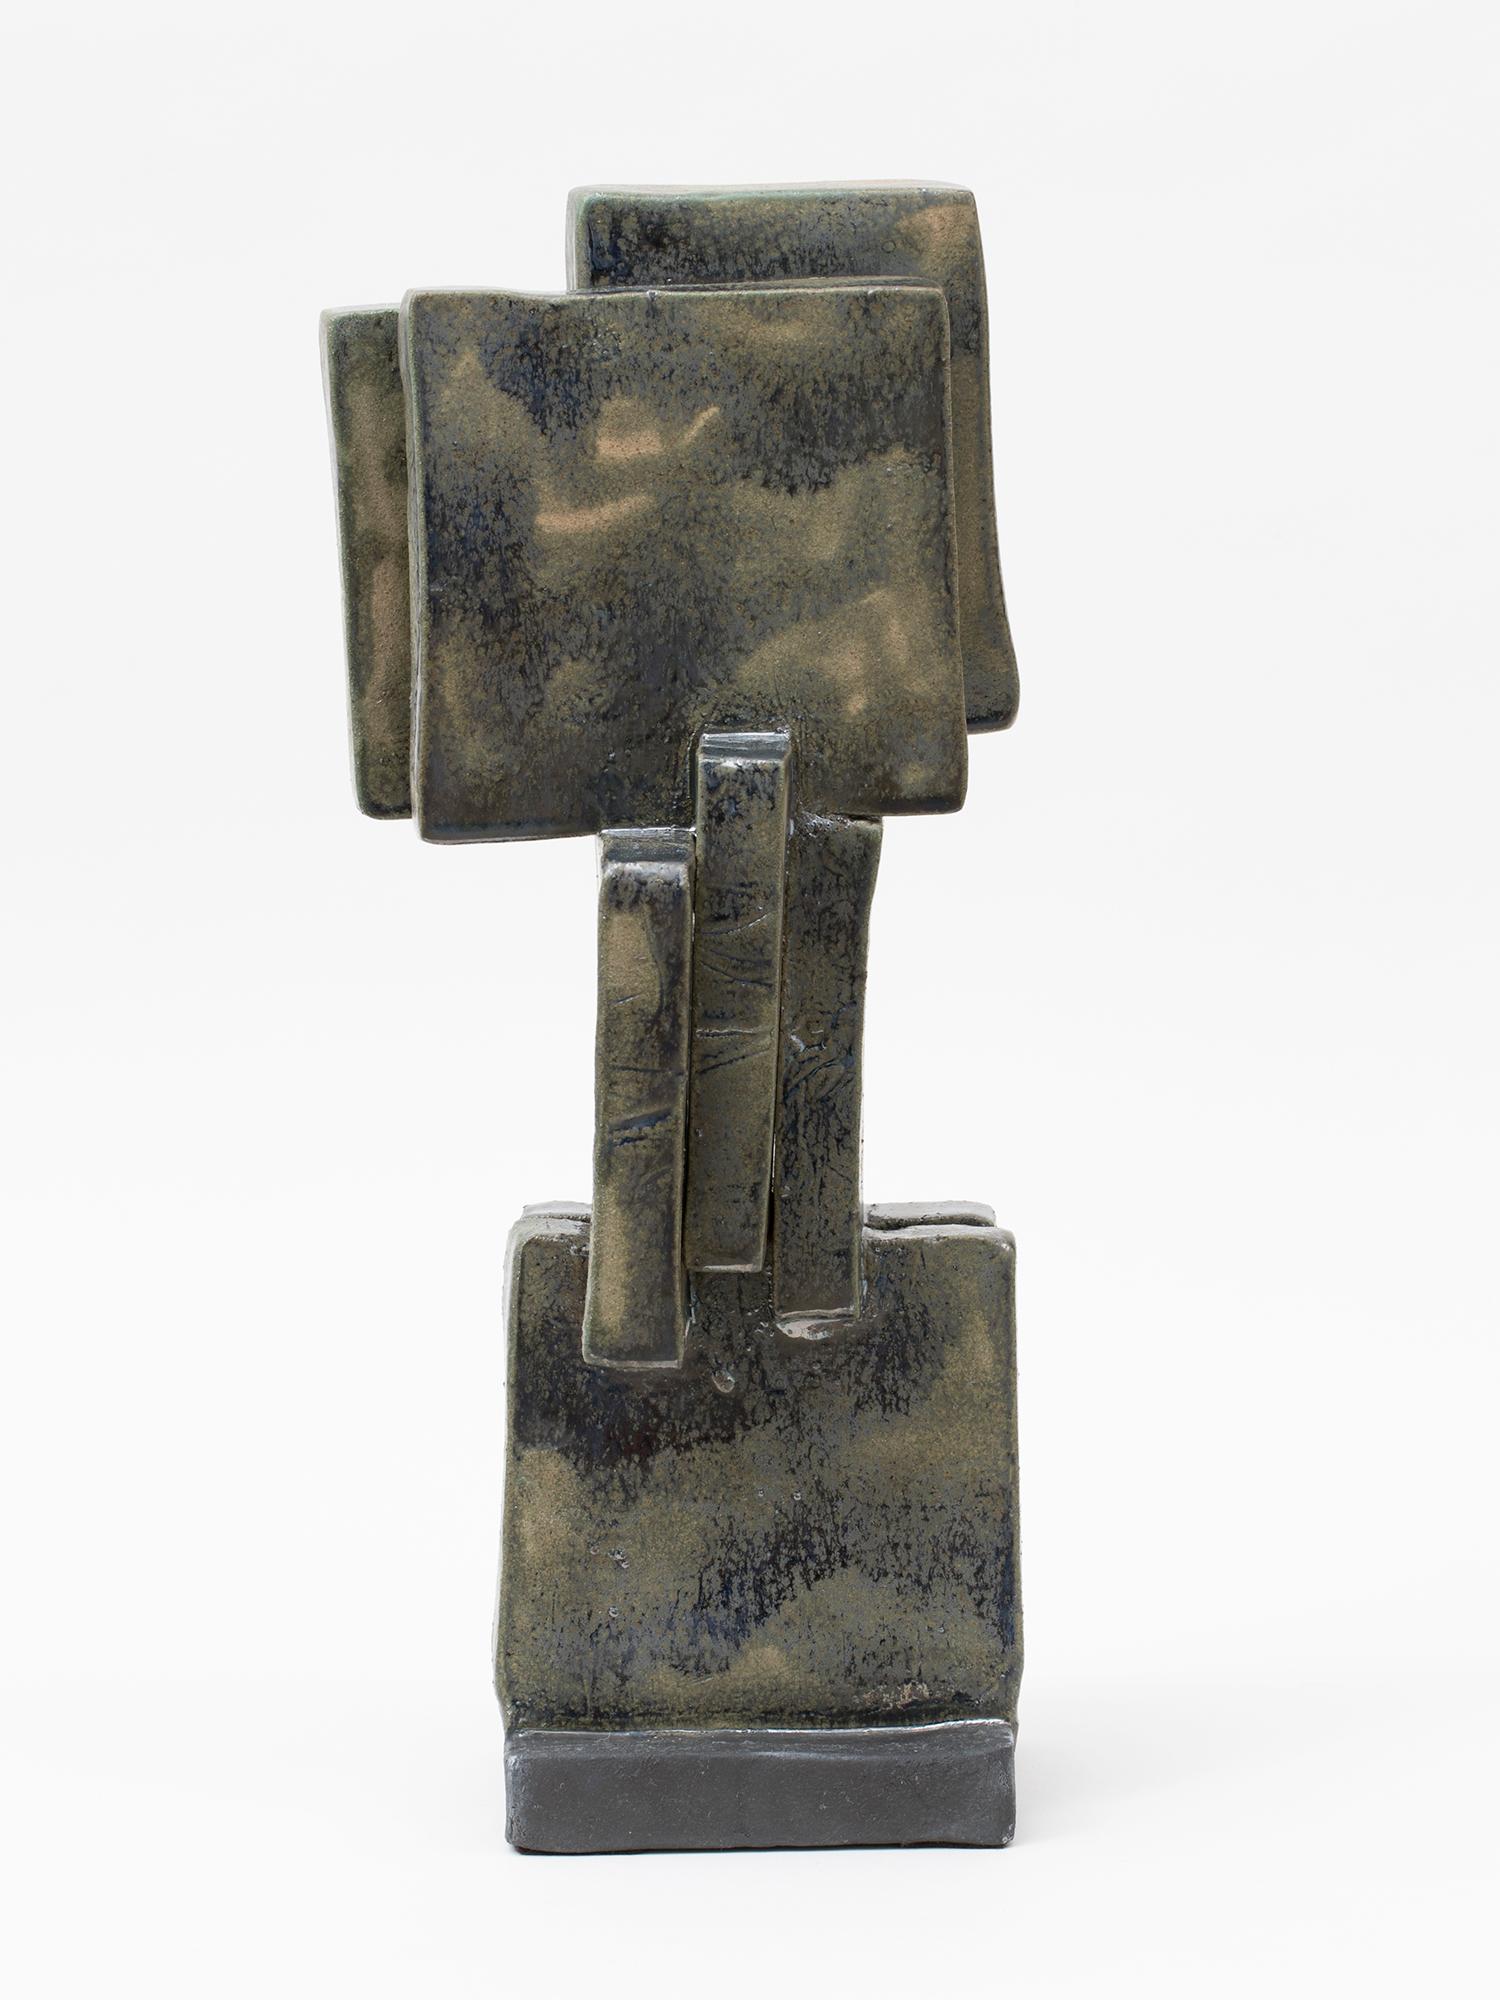 Modernist clay sculpture with organic copper glaze by artist Judy Engel of upstate New York.